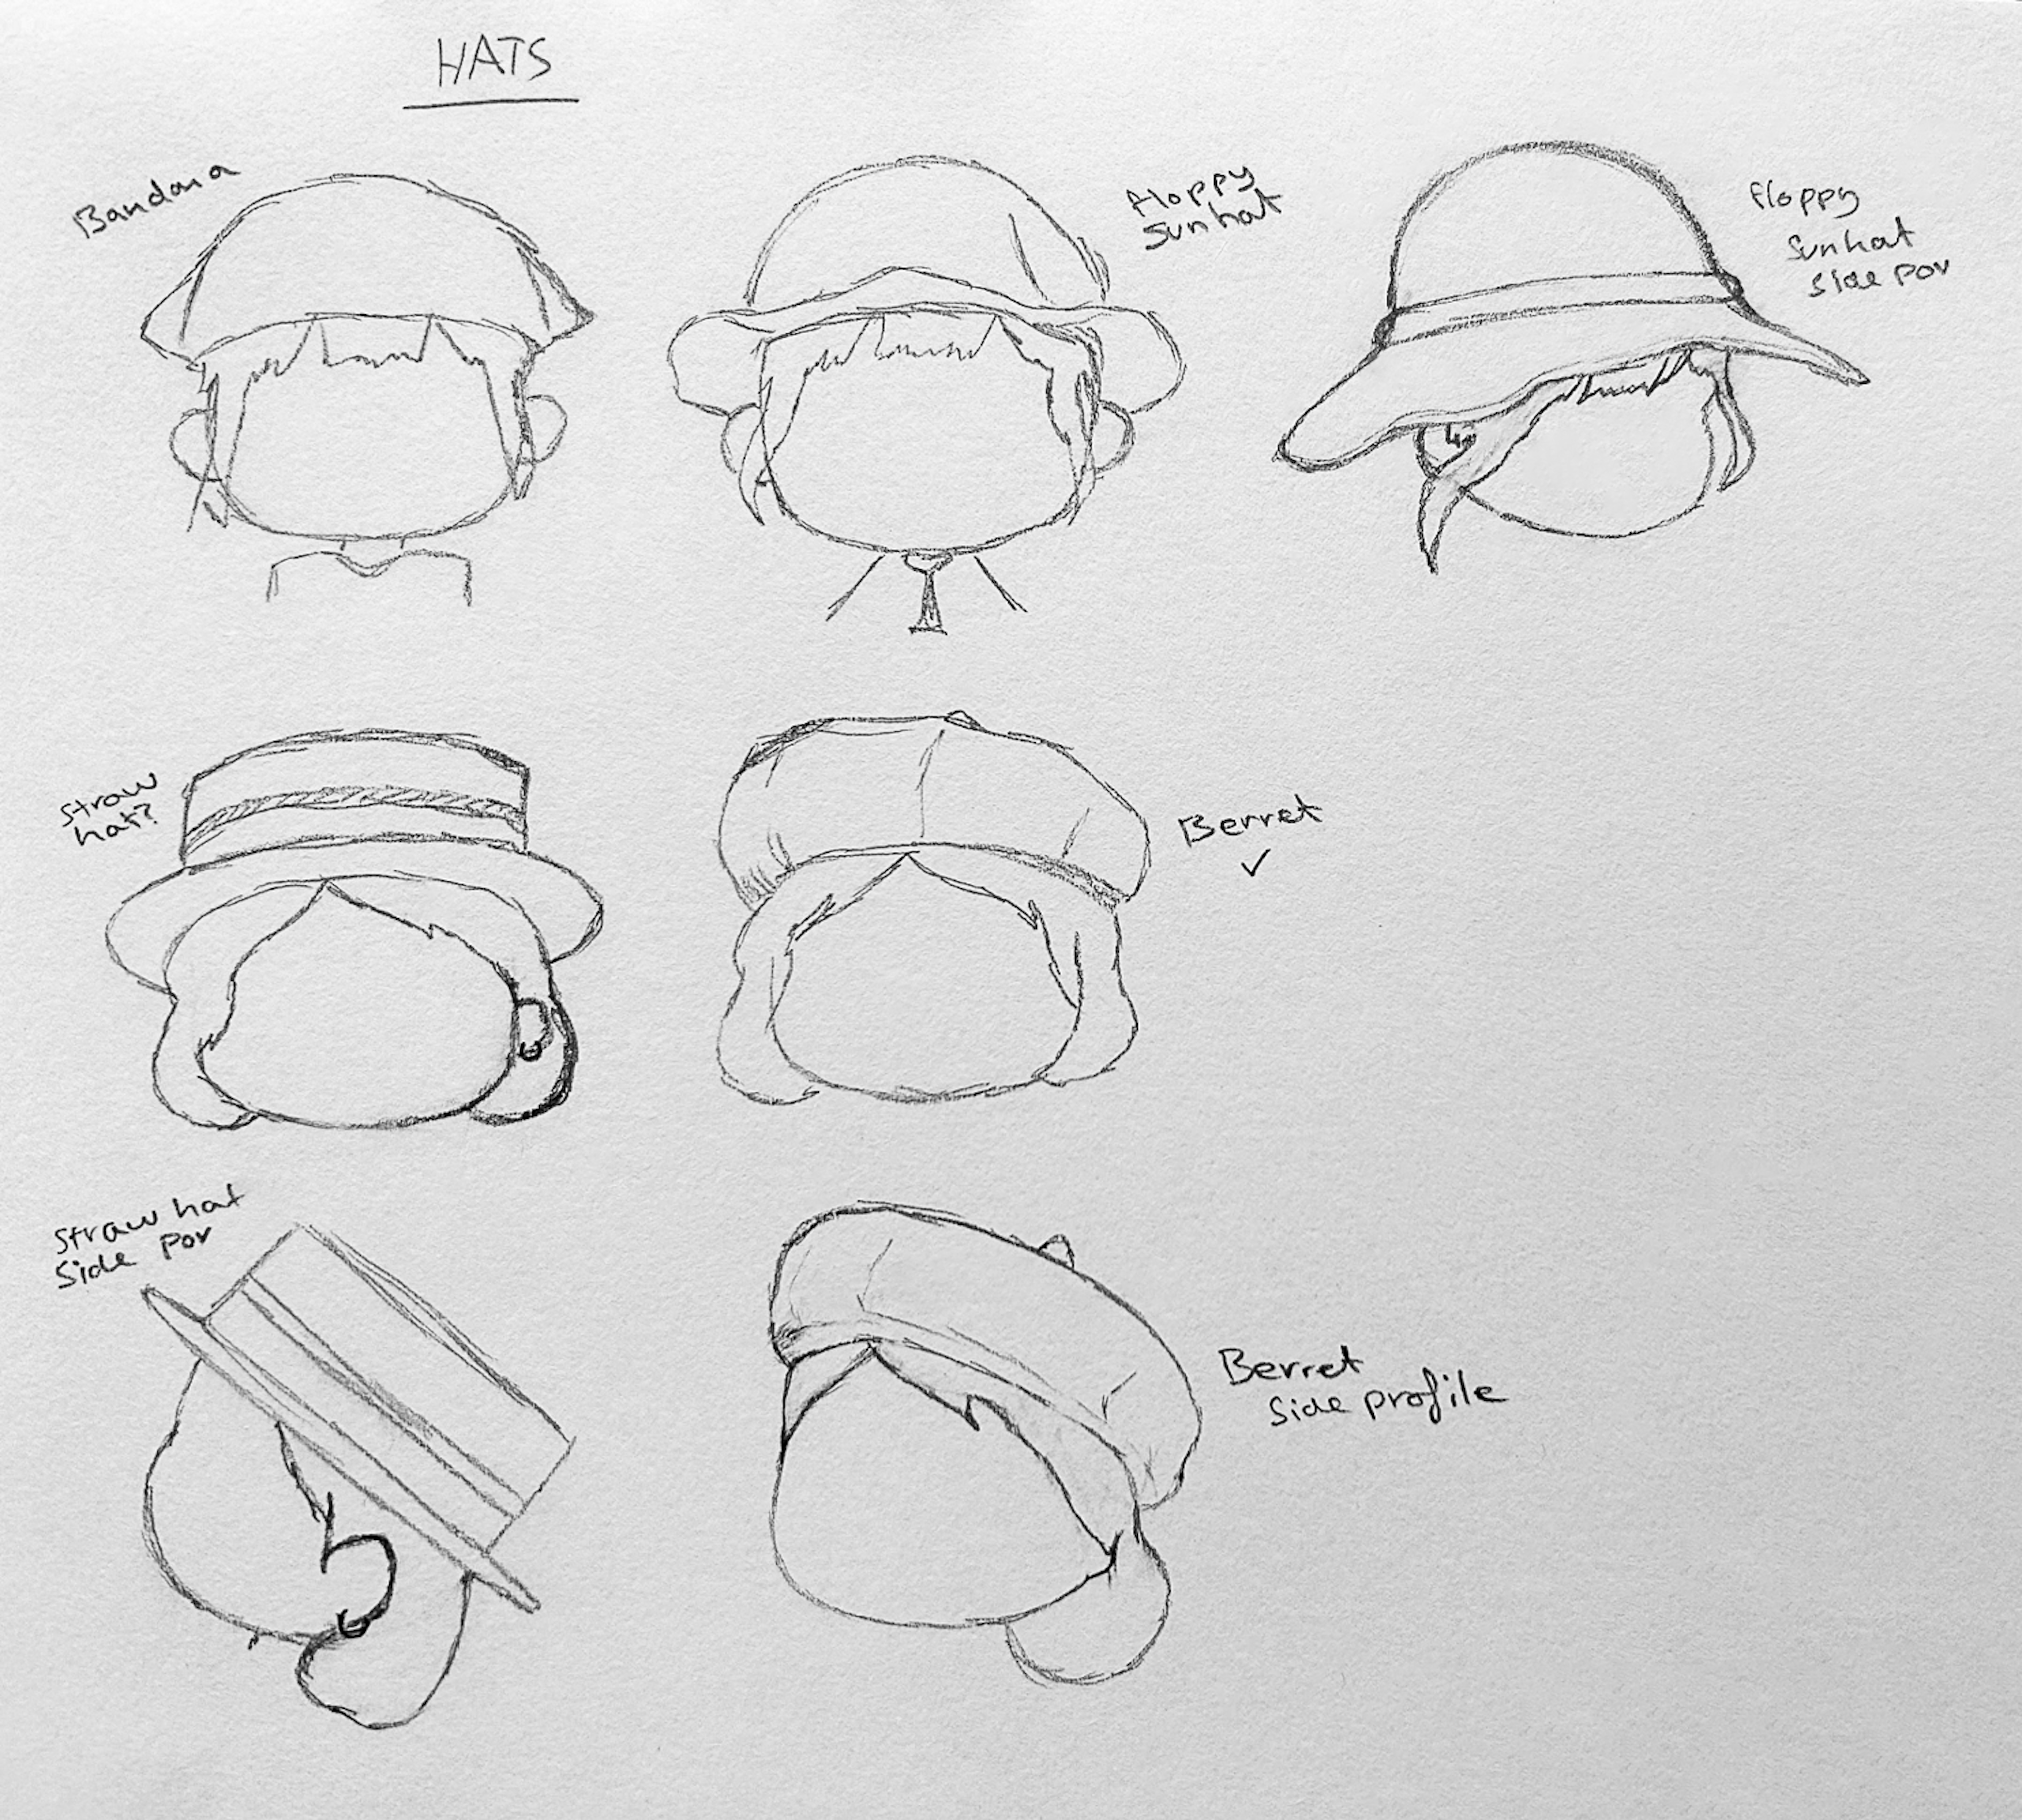 Realising the importance of Alchemy Cookie’s beret hat, a key aspect of her design, I aimed to recreate it faithfully within the Animal Crossing style. I conducted a drawing experiment, exploring different hat styles to find the most accurate and fitting design for her character.